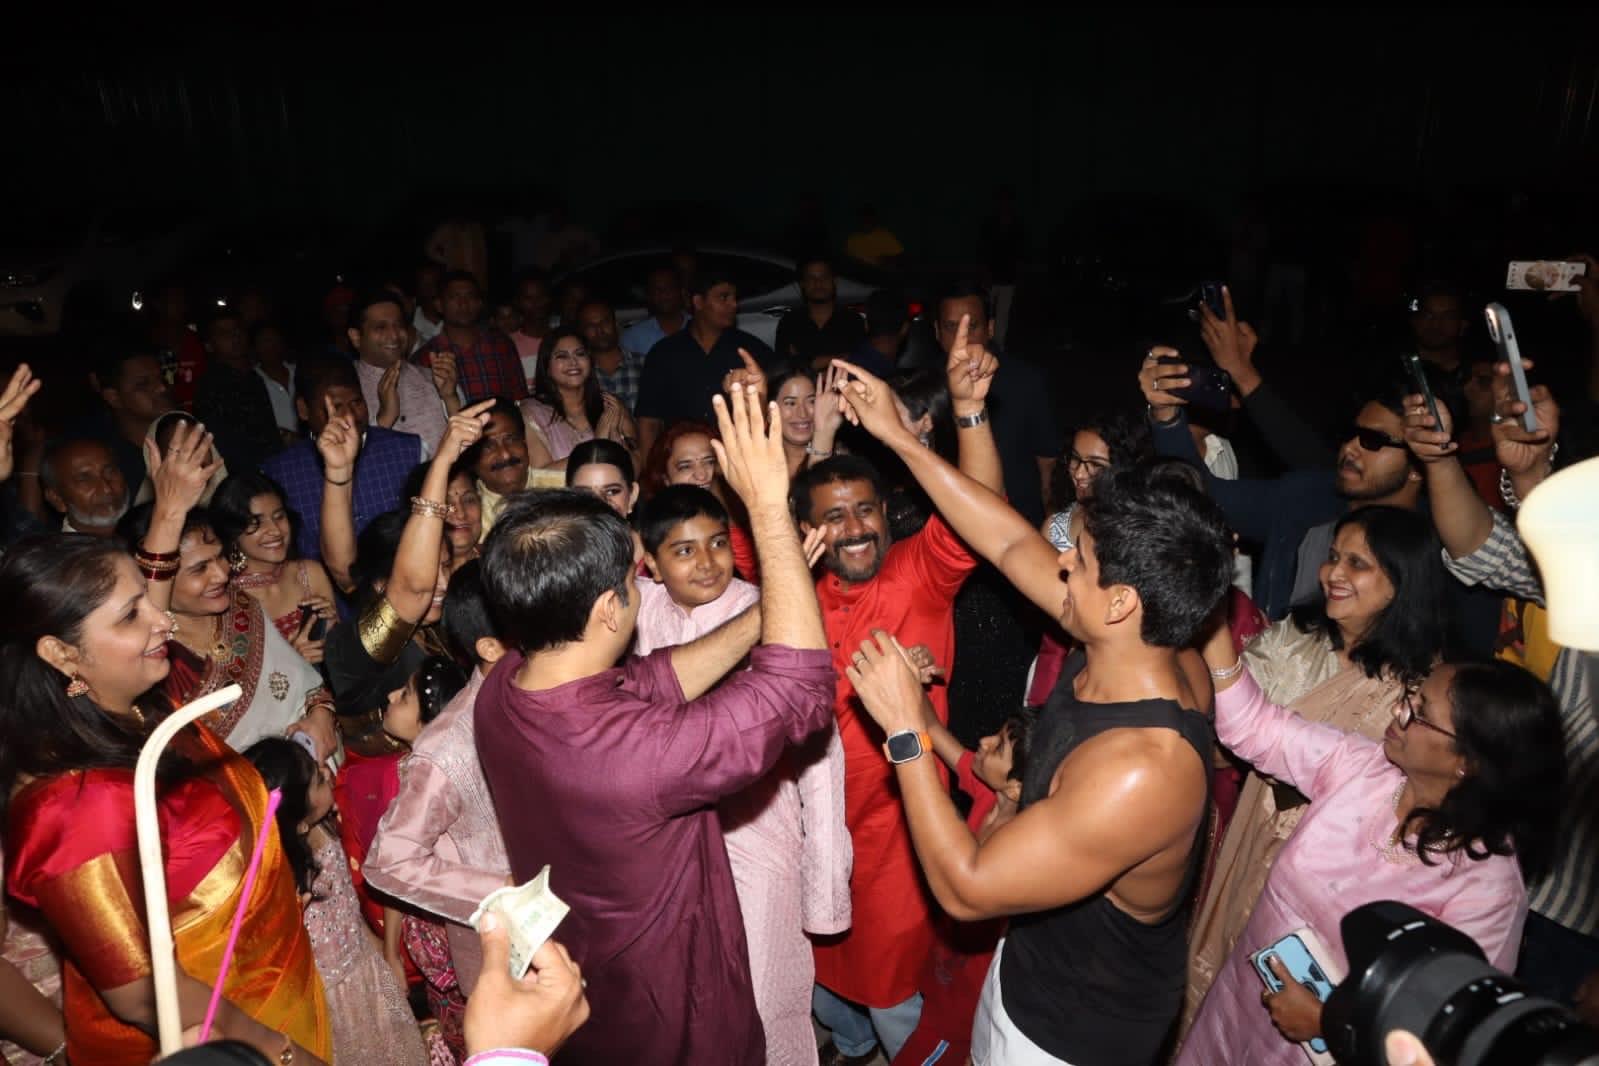 From the dhol to the family members dancing, the party was in full swing with only smiling faces around him